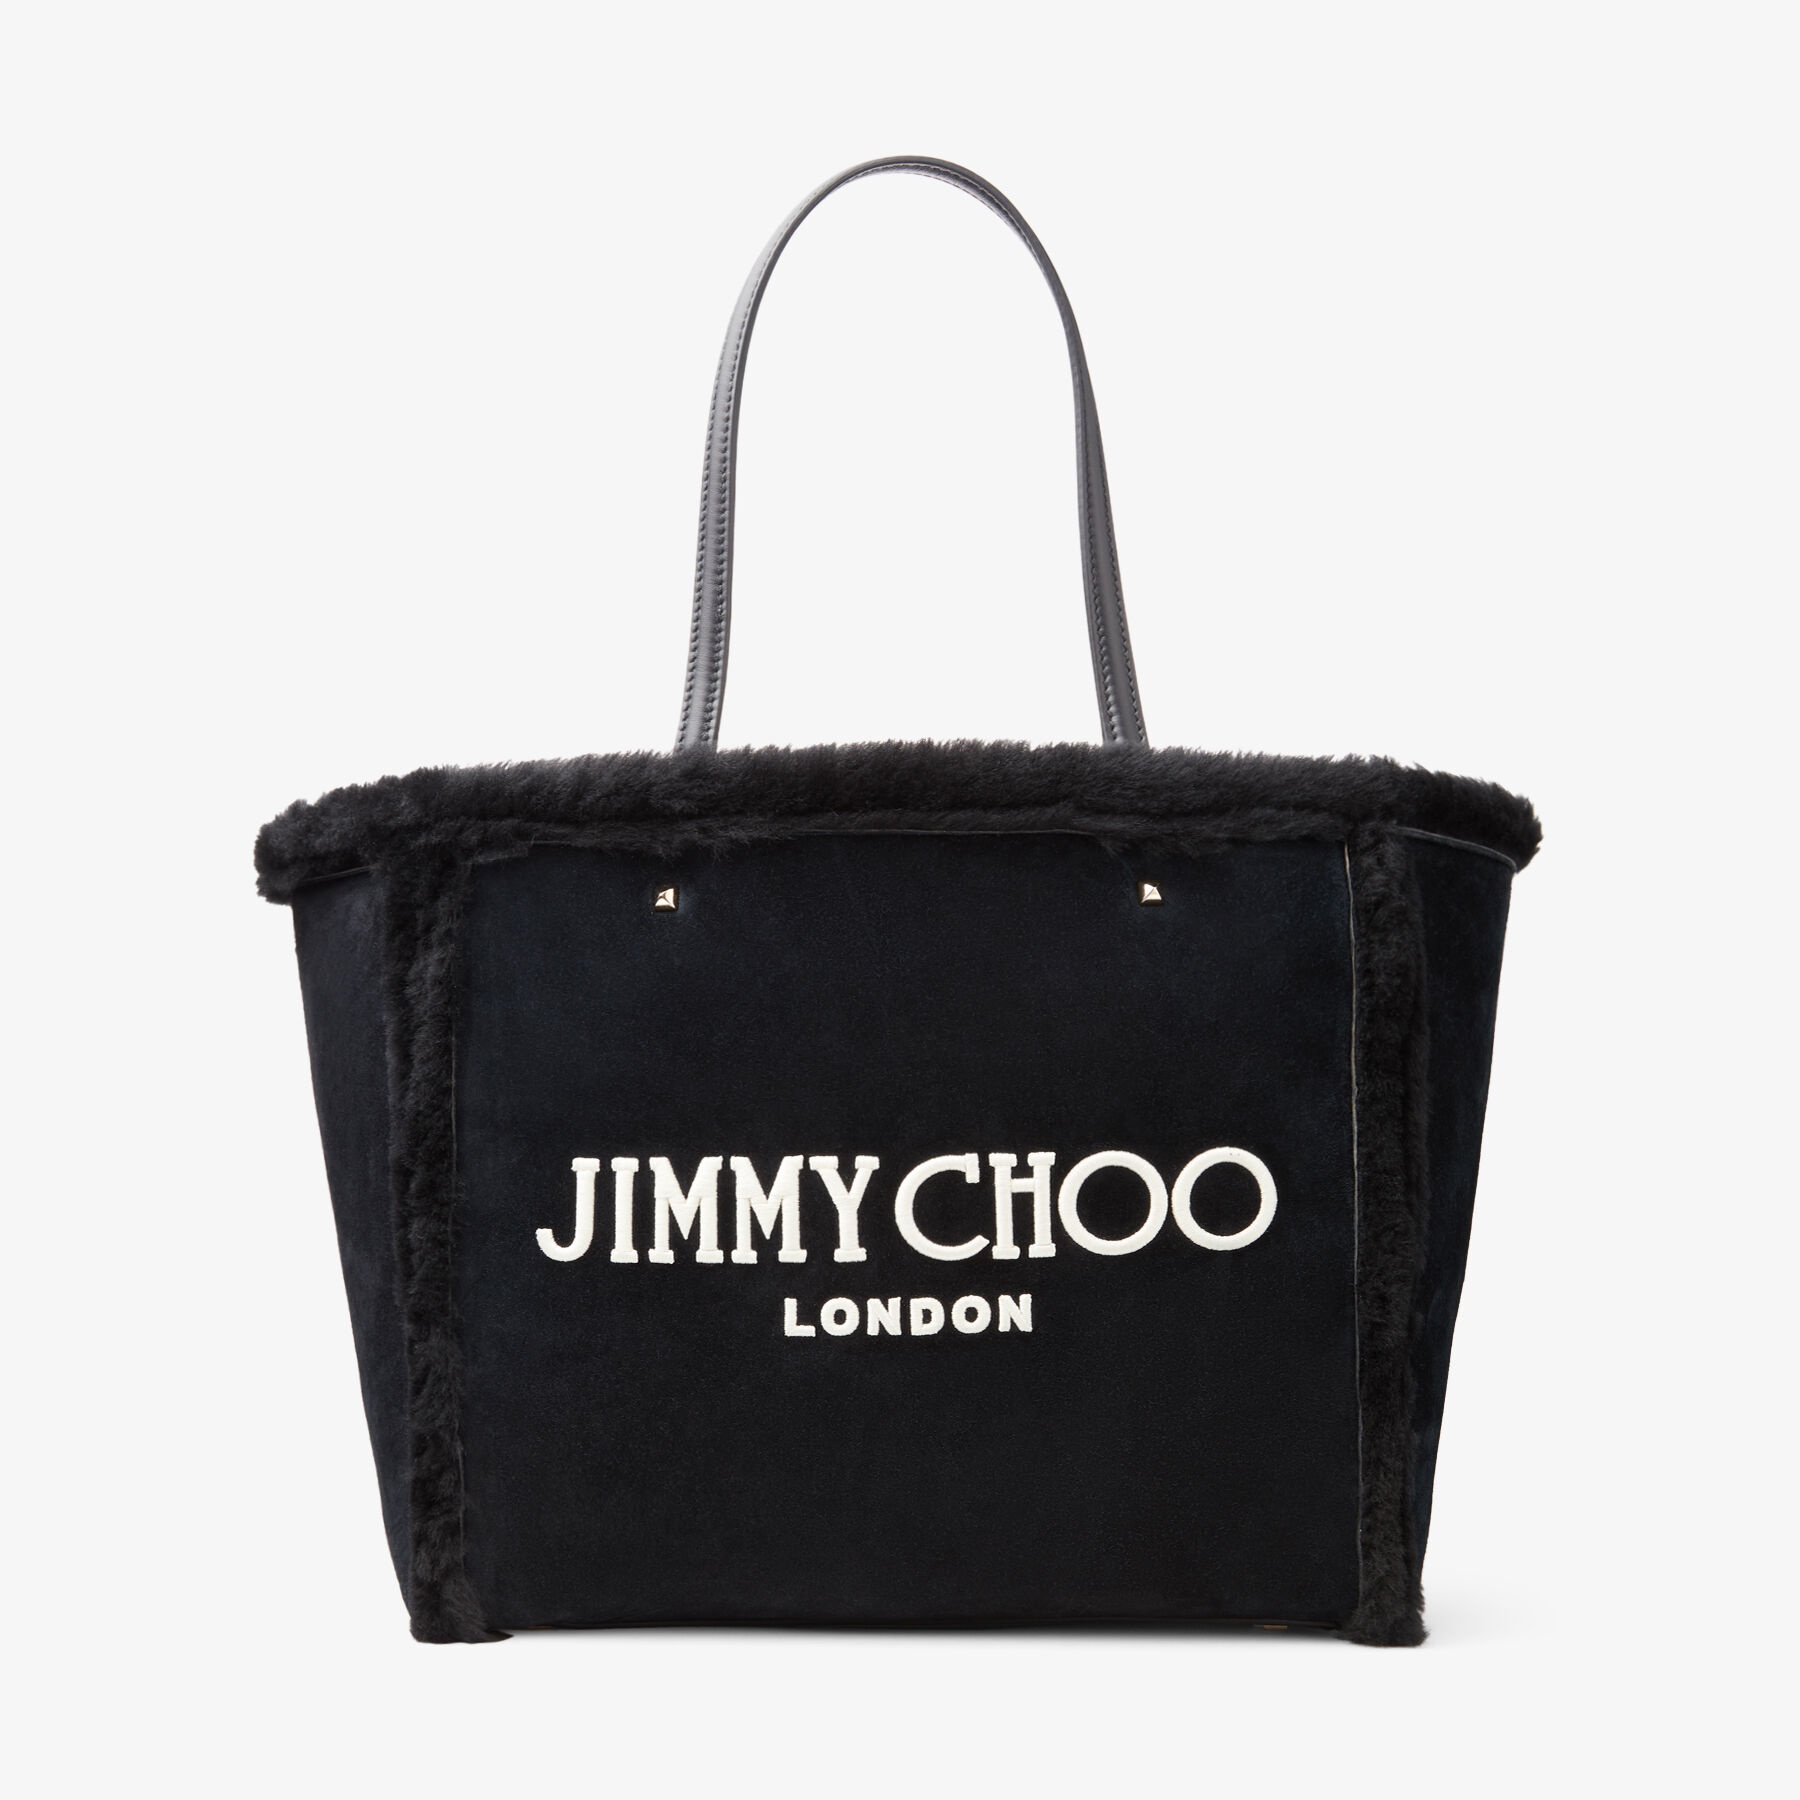 Avenue Tote Bag
Black Suede and Shearling Tote Bag with Jimmy Choo Embroidery - 1